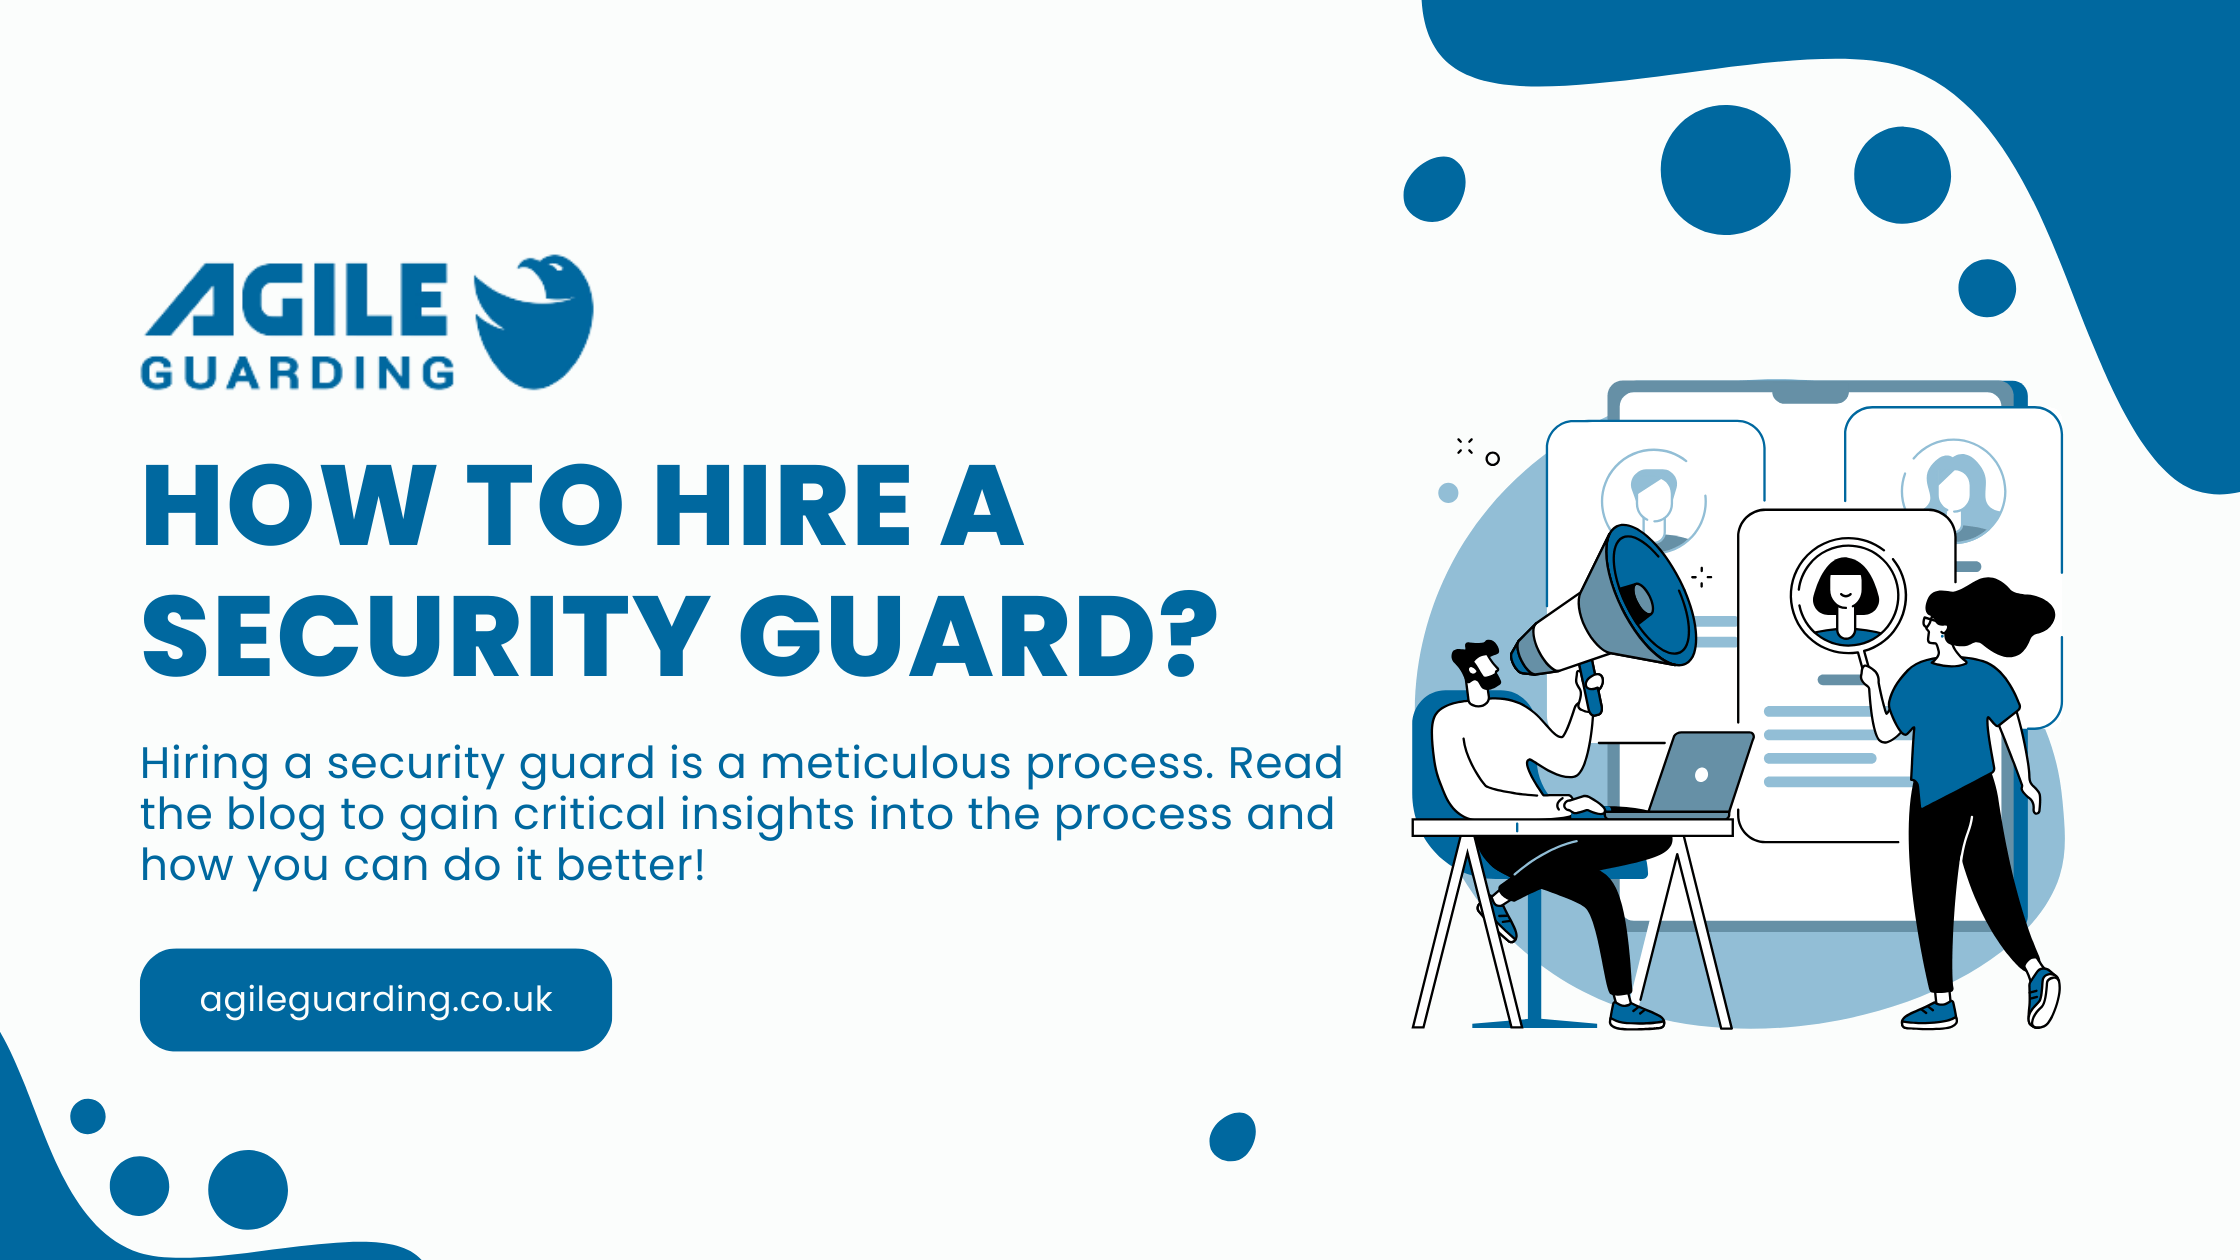 How to hire a security guard